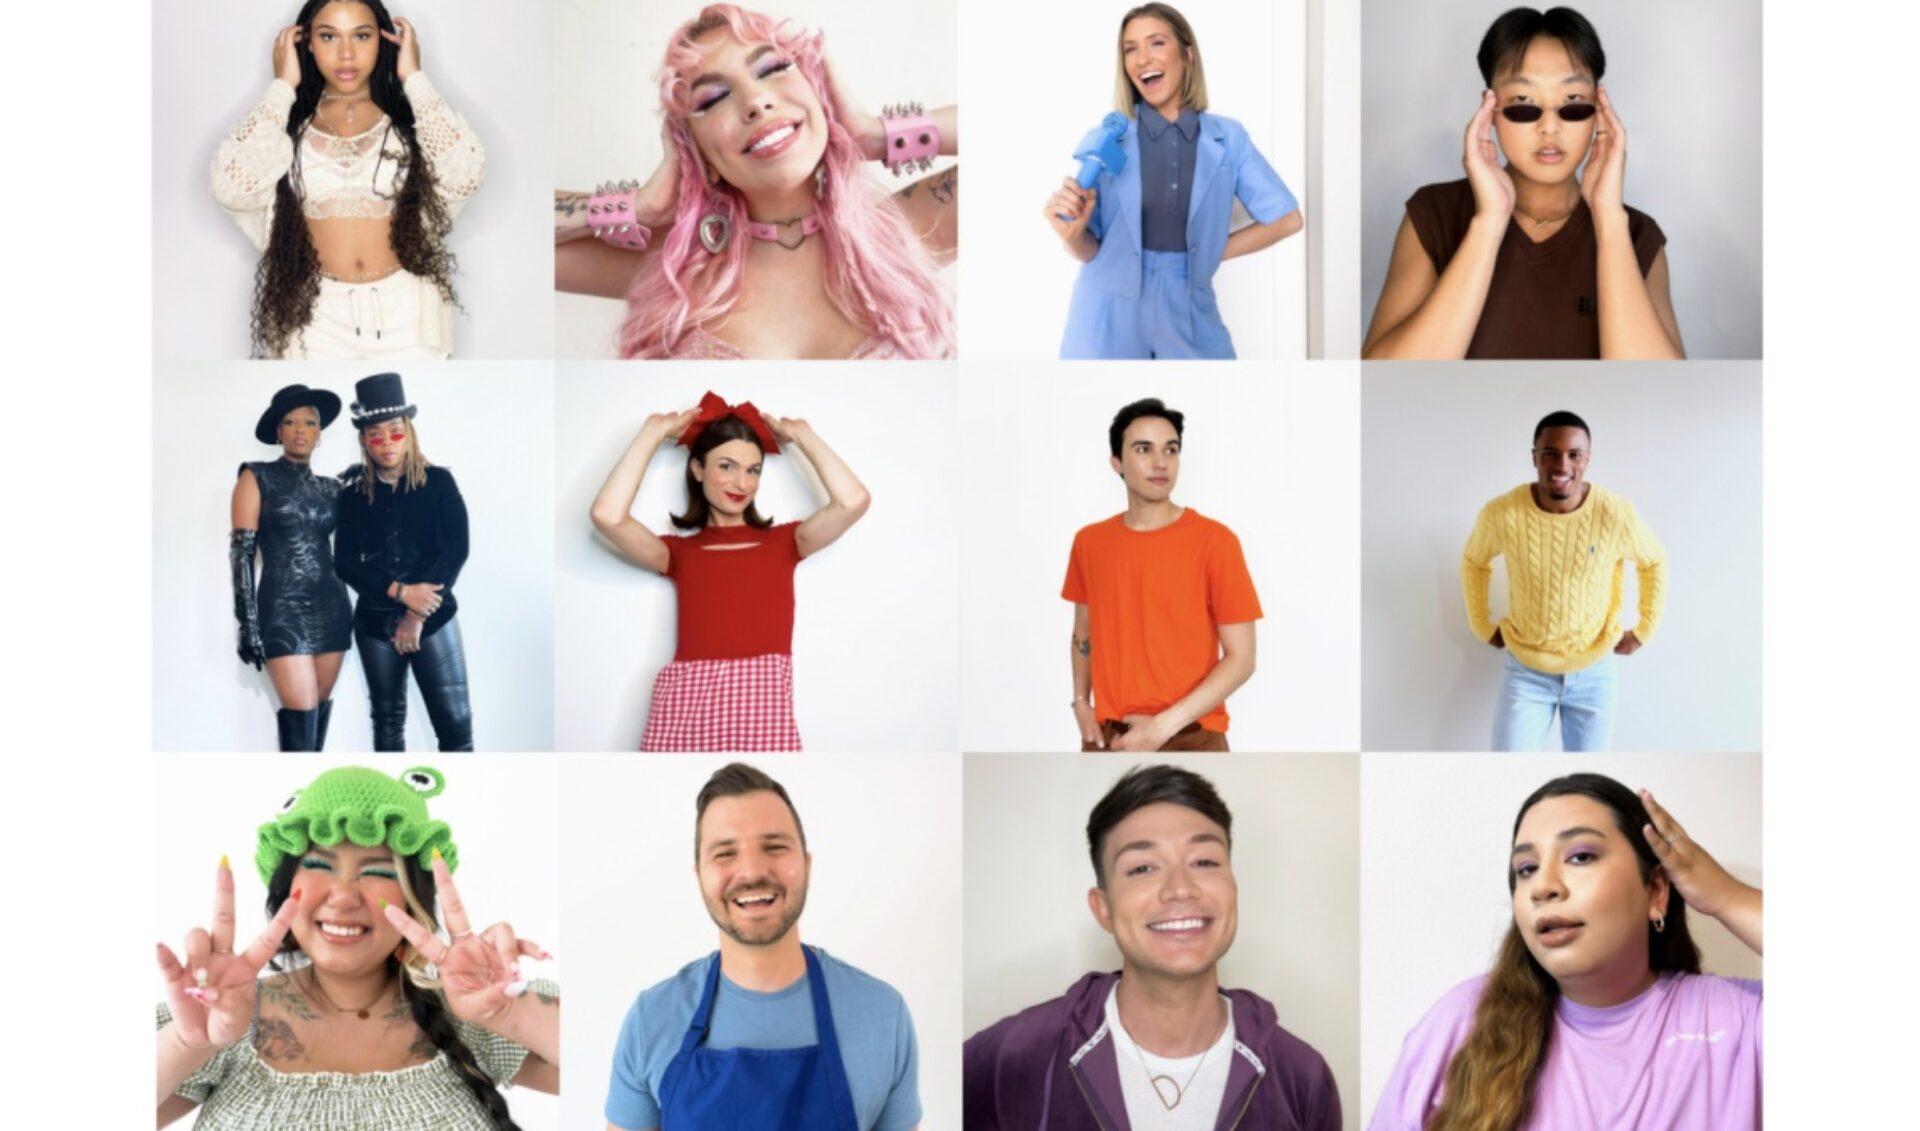 Facebook, TikTok, Snapchat, and YouTube are also launching new initiatives in honor of Pride Month – with the reminder that LGBTQPIA+ folks should be celebrated all year long.